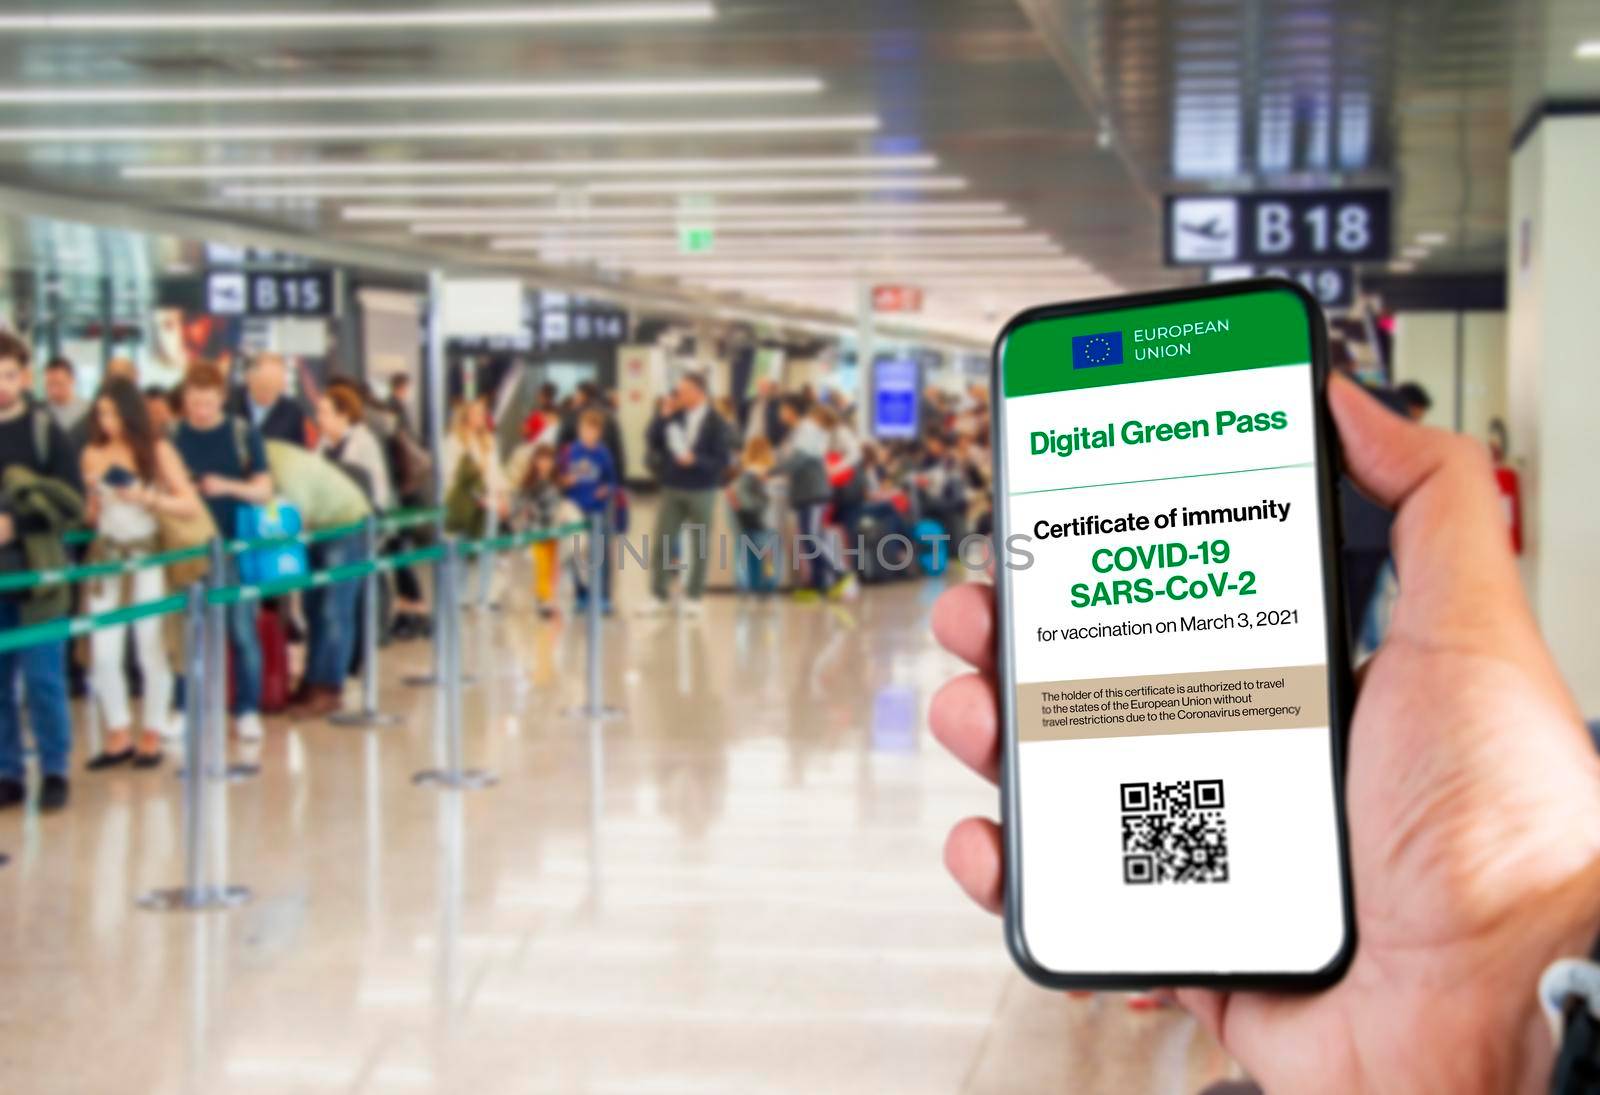 The digital green pass of the european union with the QR code on the screen of a mobile held by a hand with a blurred airport in the background by rarrarorro